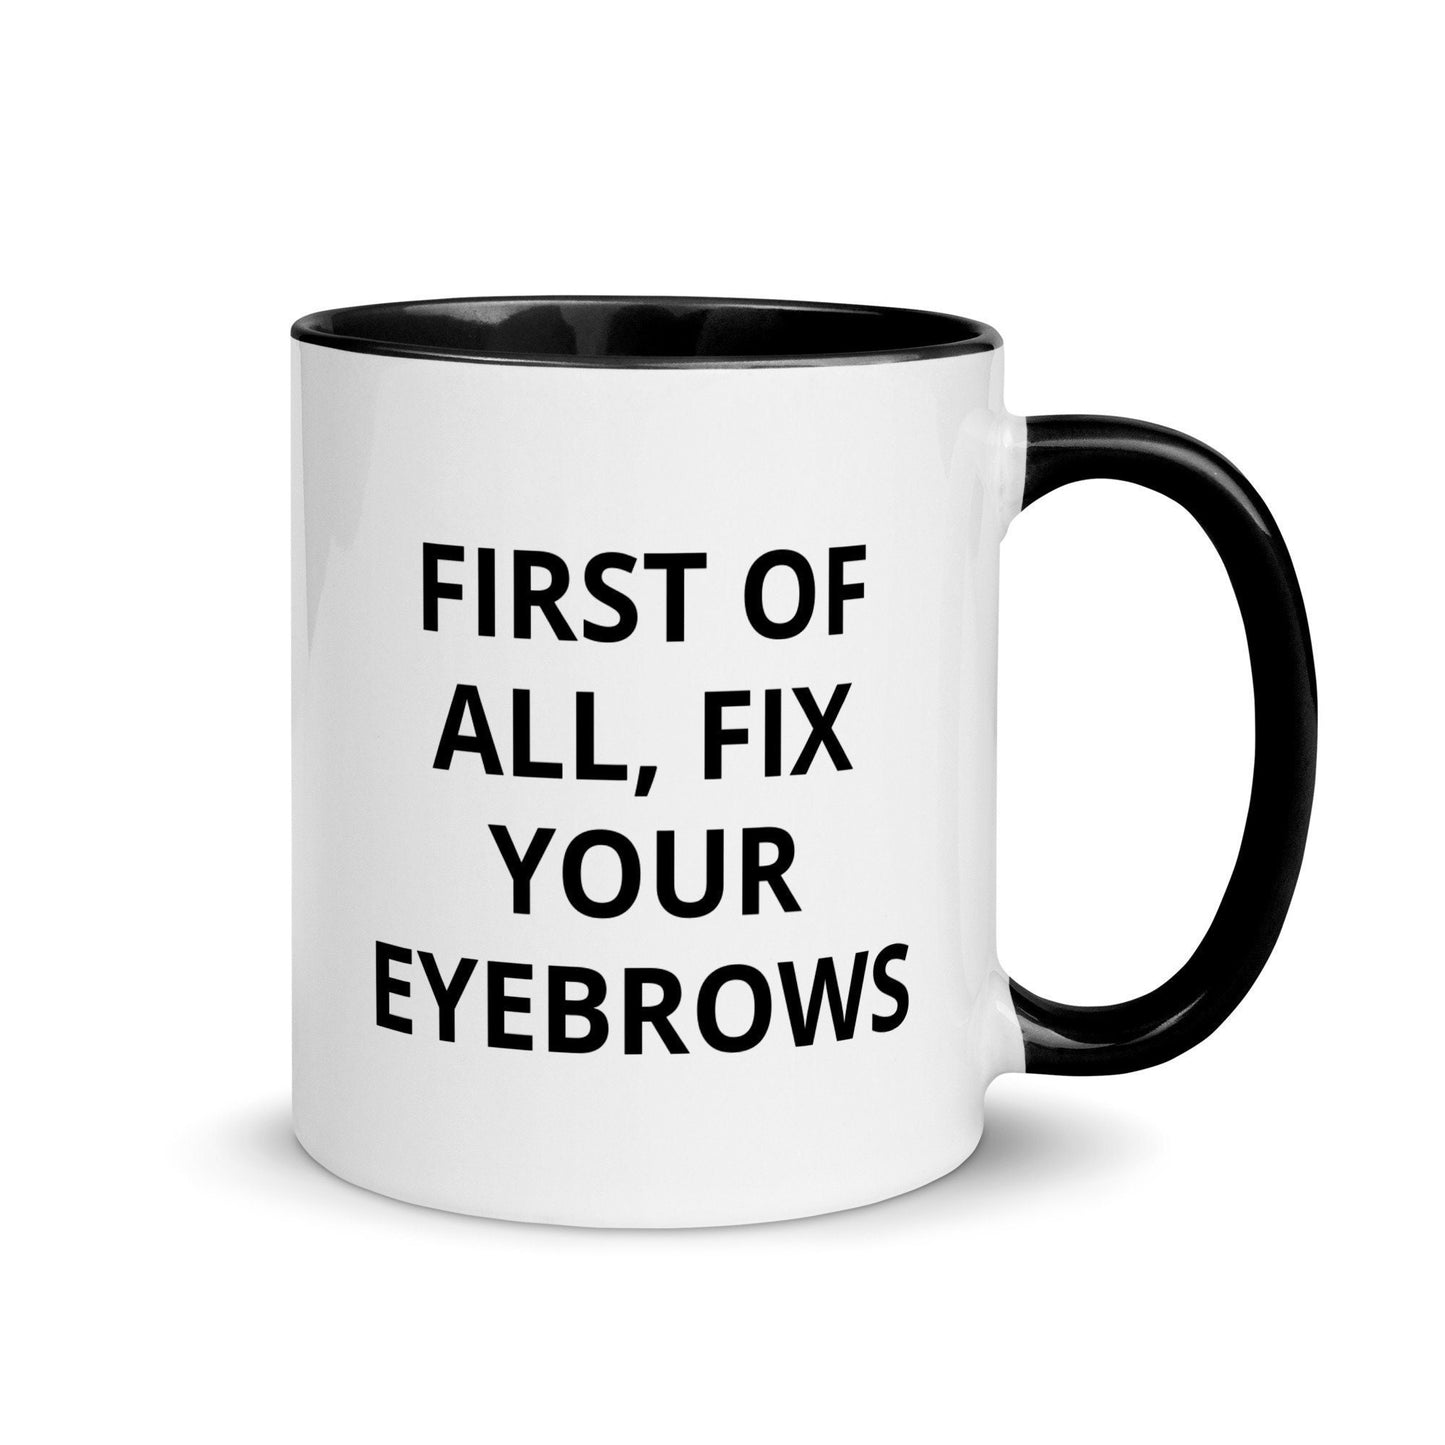 First Of All, Fix Your Eyebrows, Sarcastic, Rude Mug with Color Inside